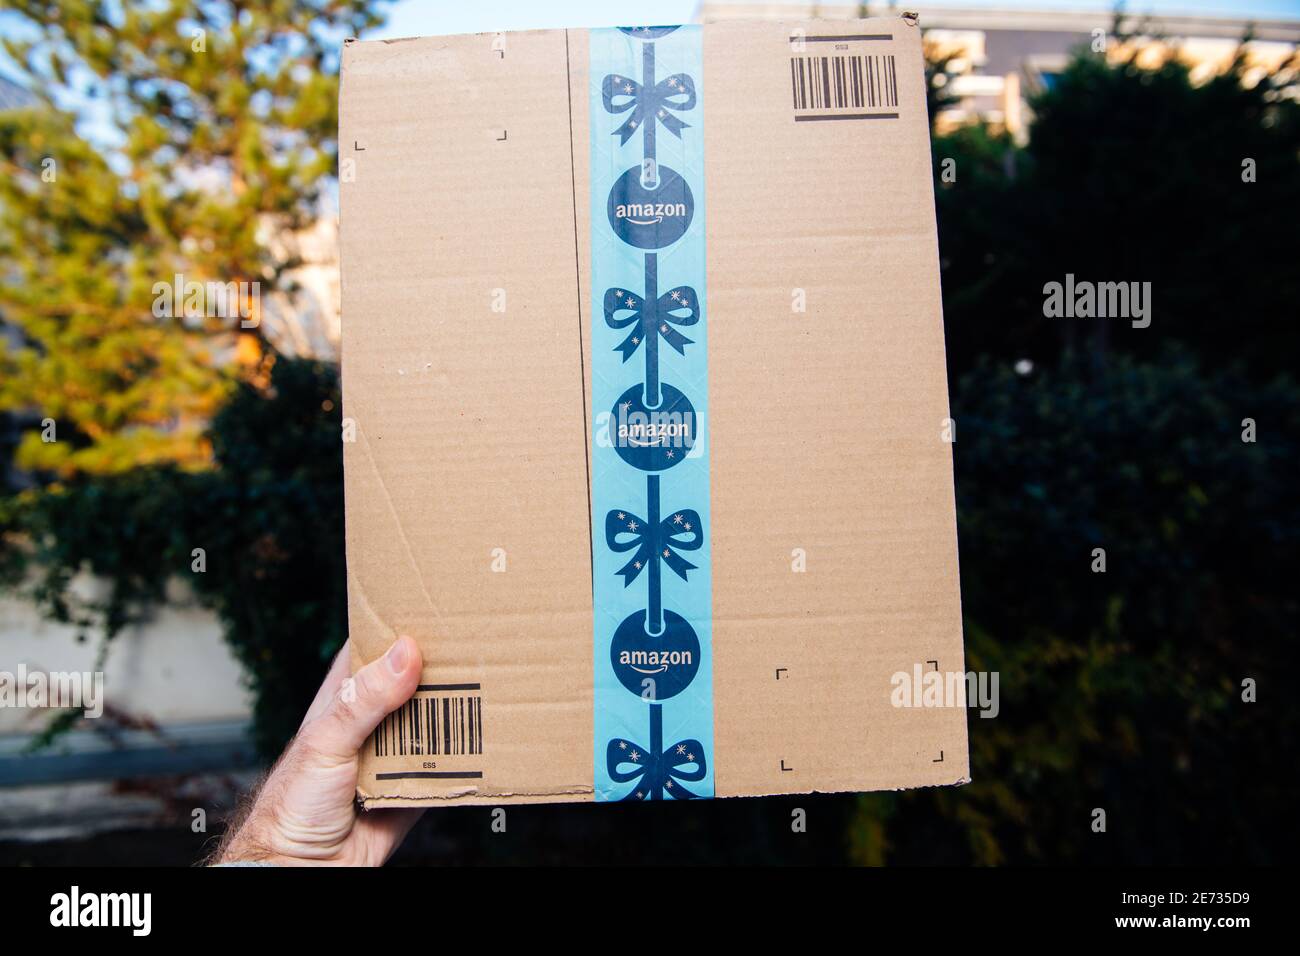 Paris, France - Nov 16, 2018: Point of view male hand holding showing Amazon Prime cardboard with festive holiday scotch tape - defocused city background Stock Photo